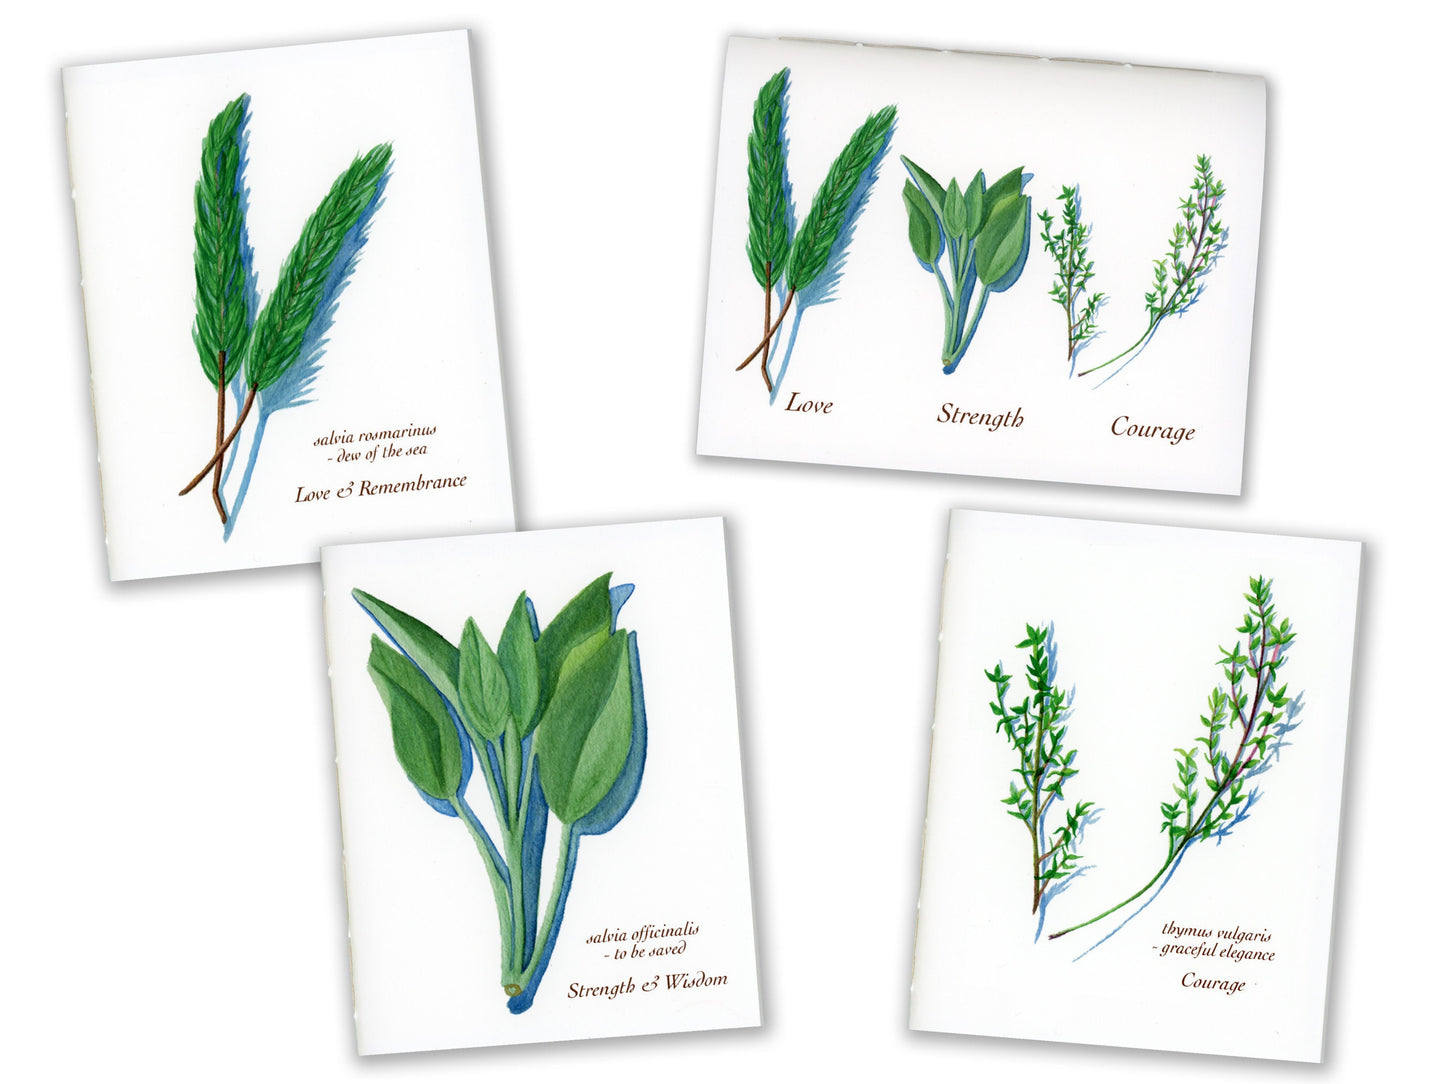 1 Small Journal - The Culinary Herbs Series - Rosemary